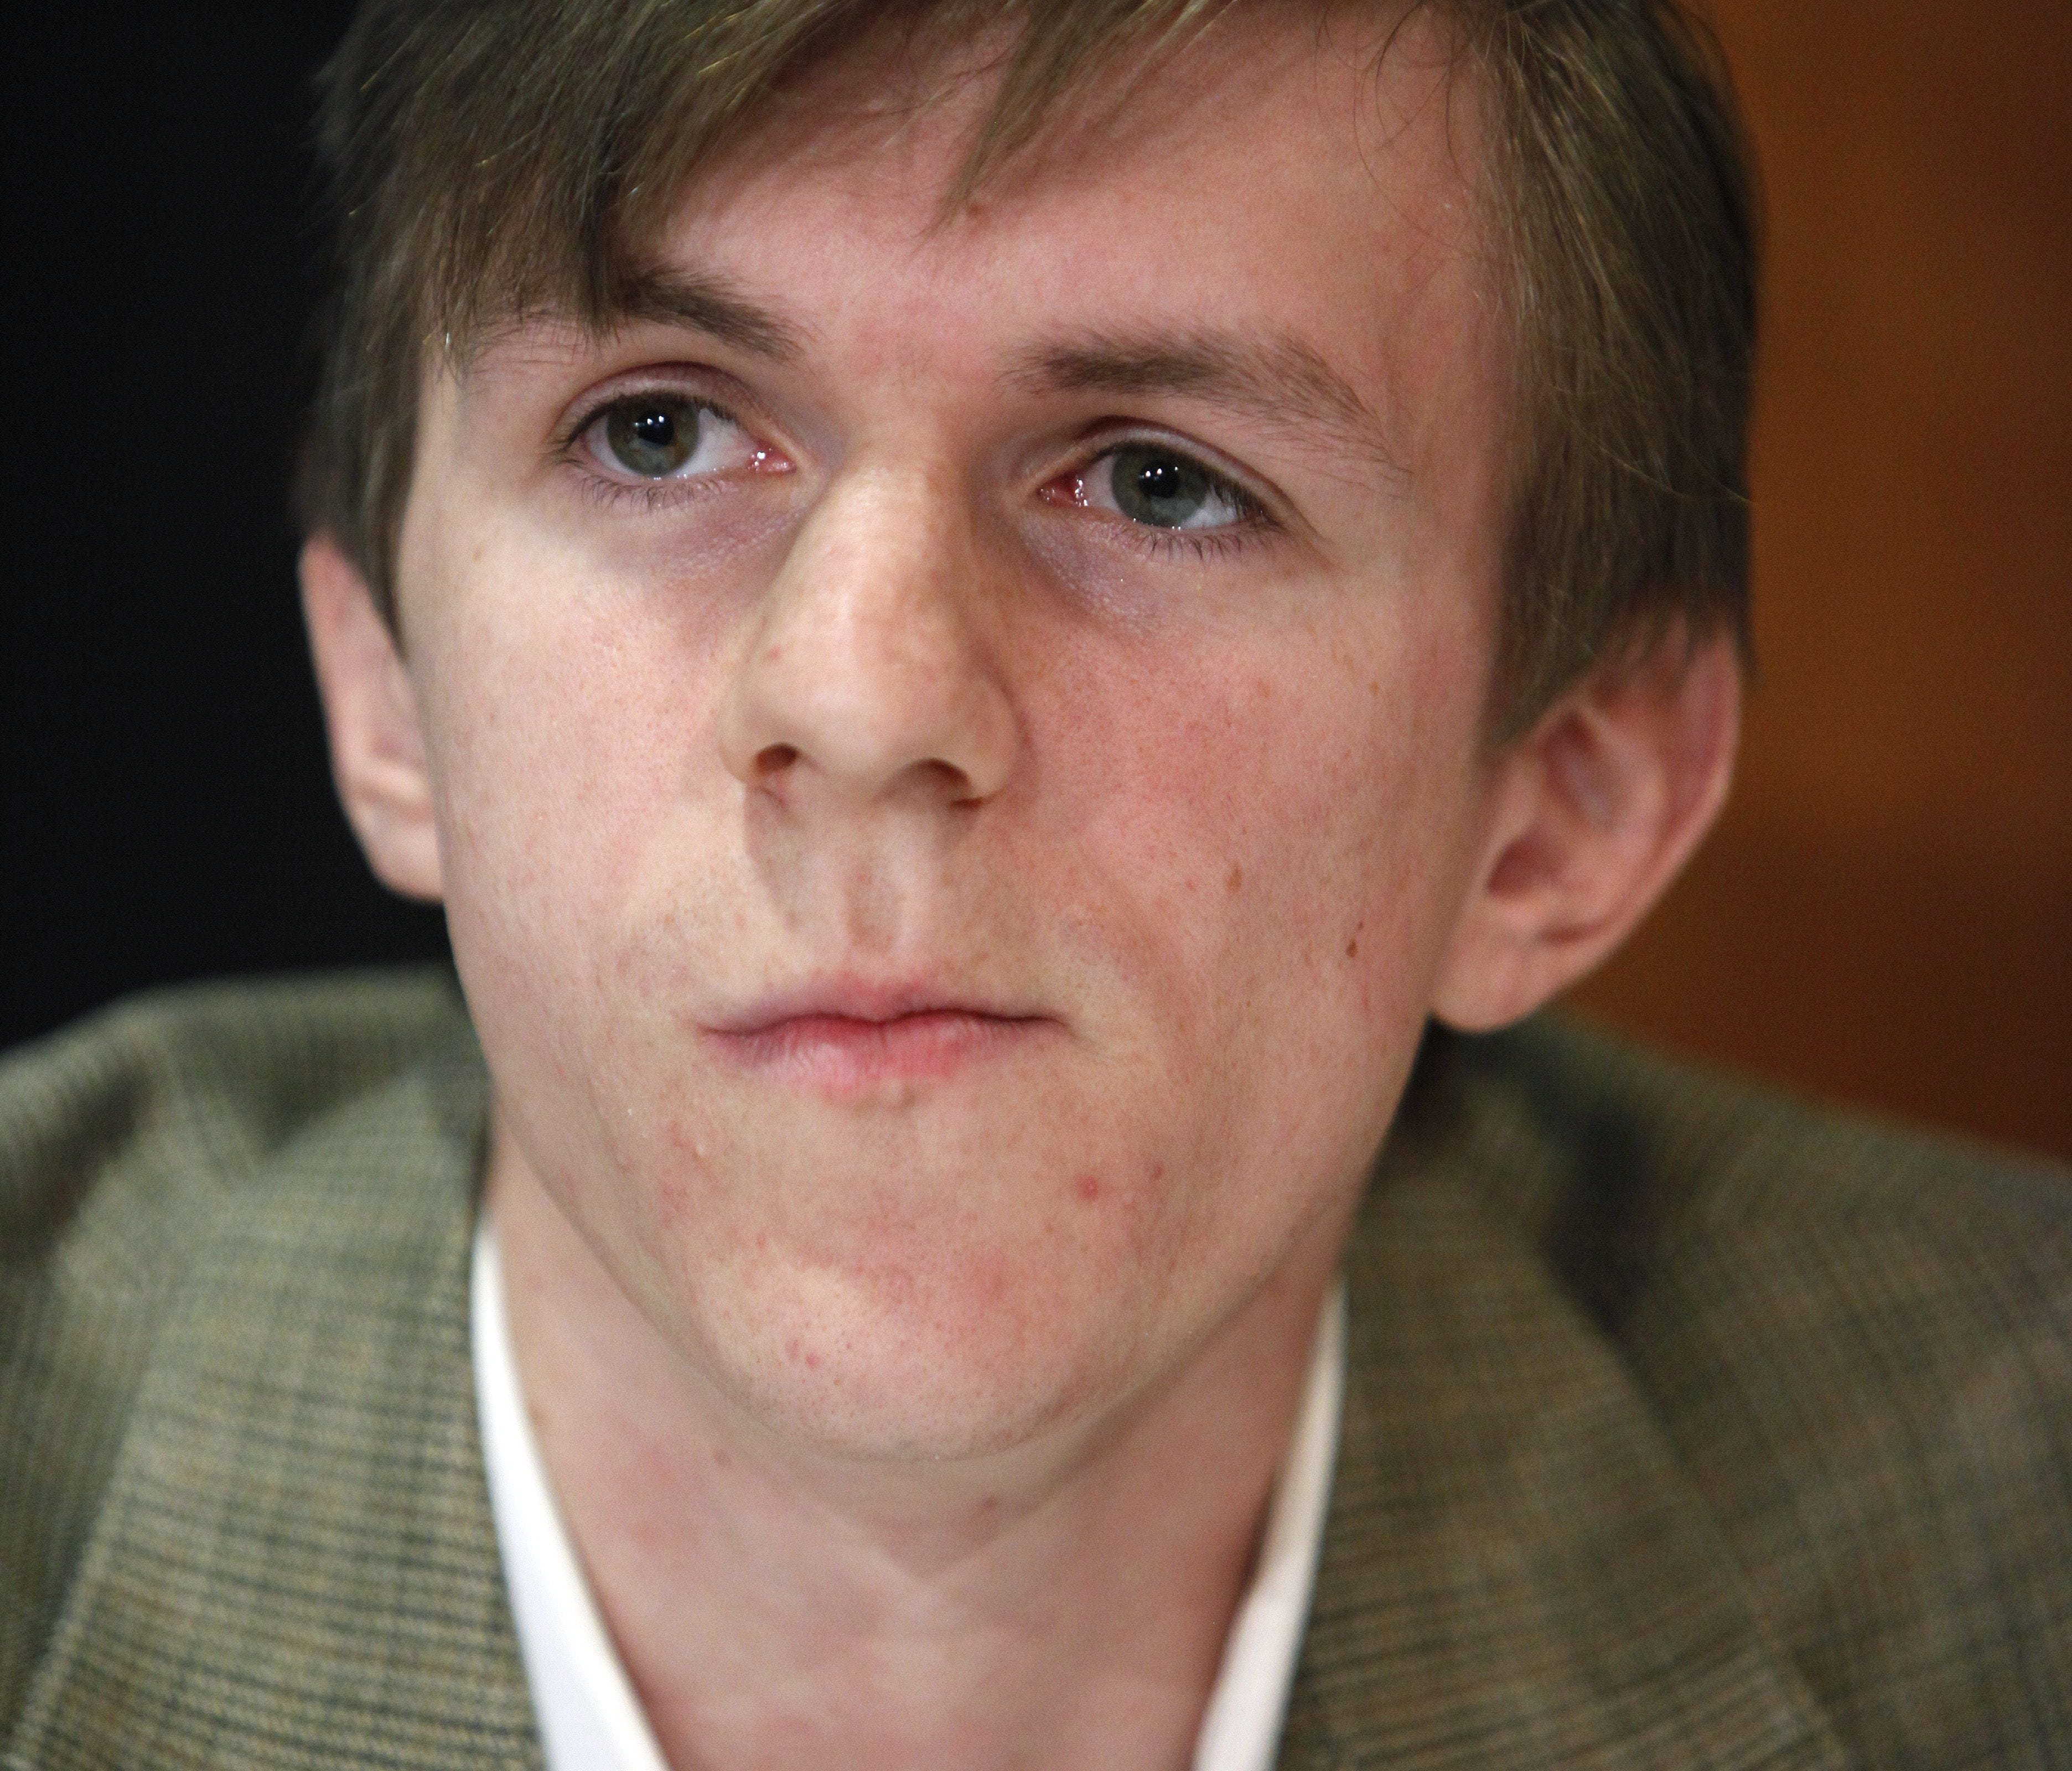 James O'Keefe attends a news conference at the National Press Club in Washington.